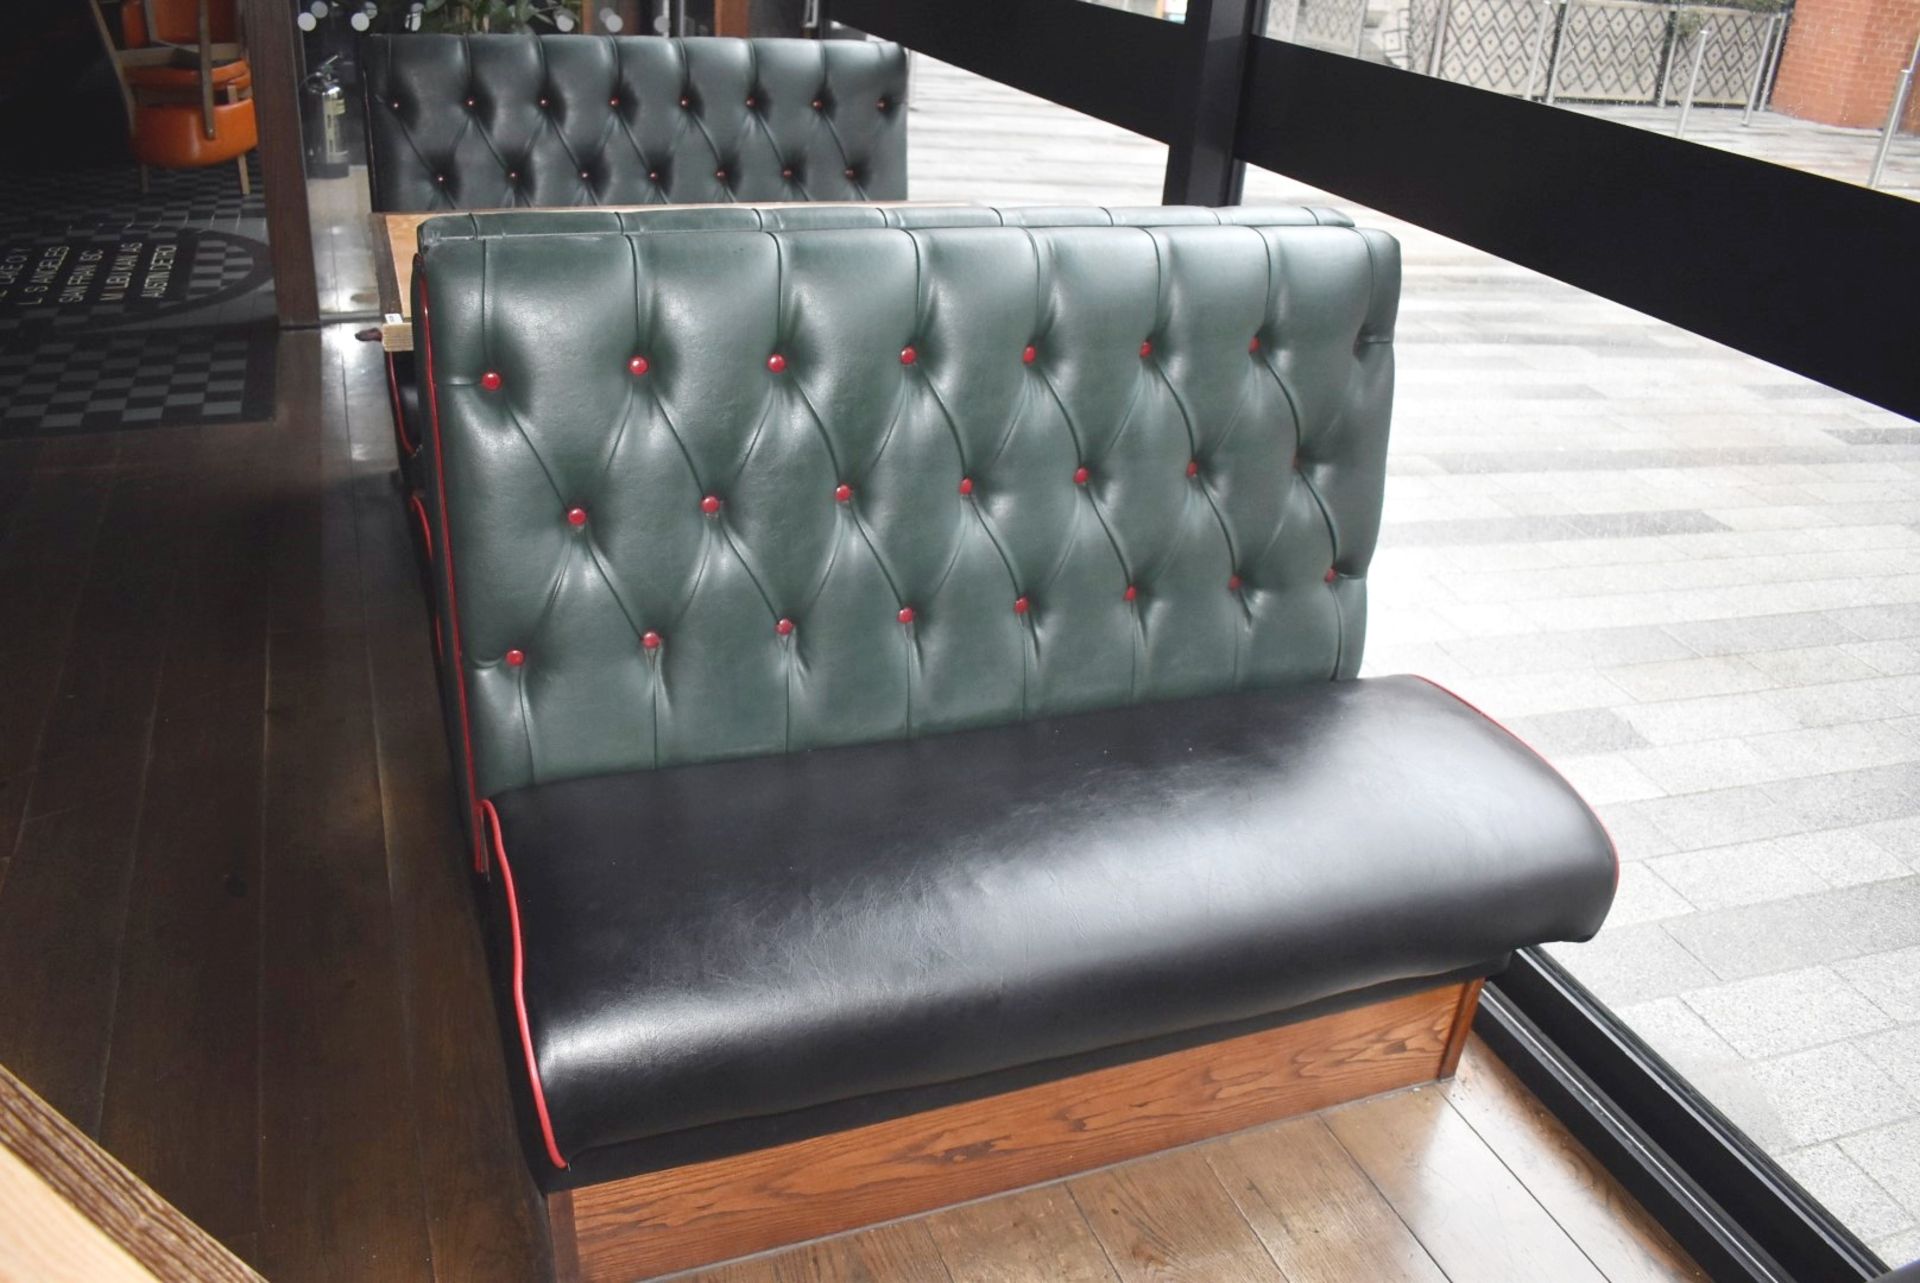 4 x Sections of Restaurant Double Booth Seating - Sits Up to 12 Persons - Green & Black Upholstery - Image 8 of 24